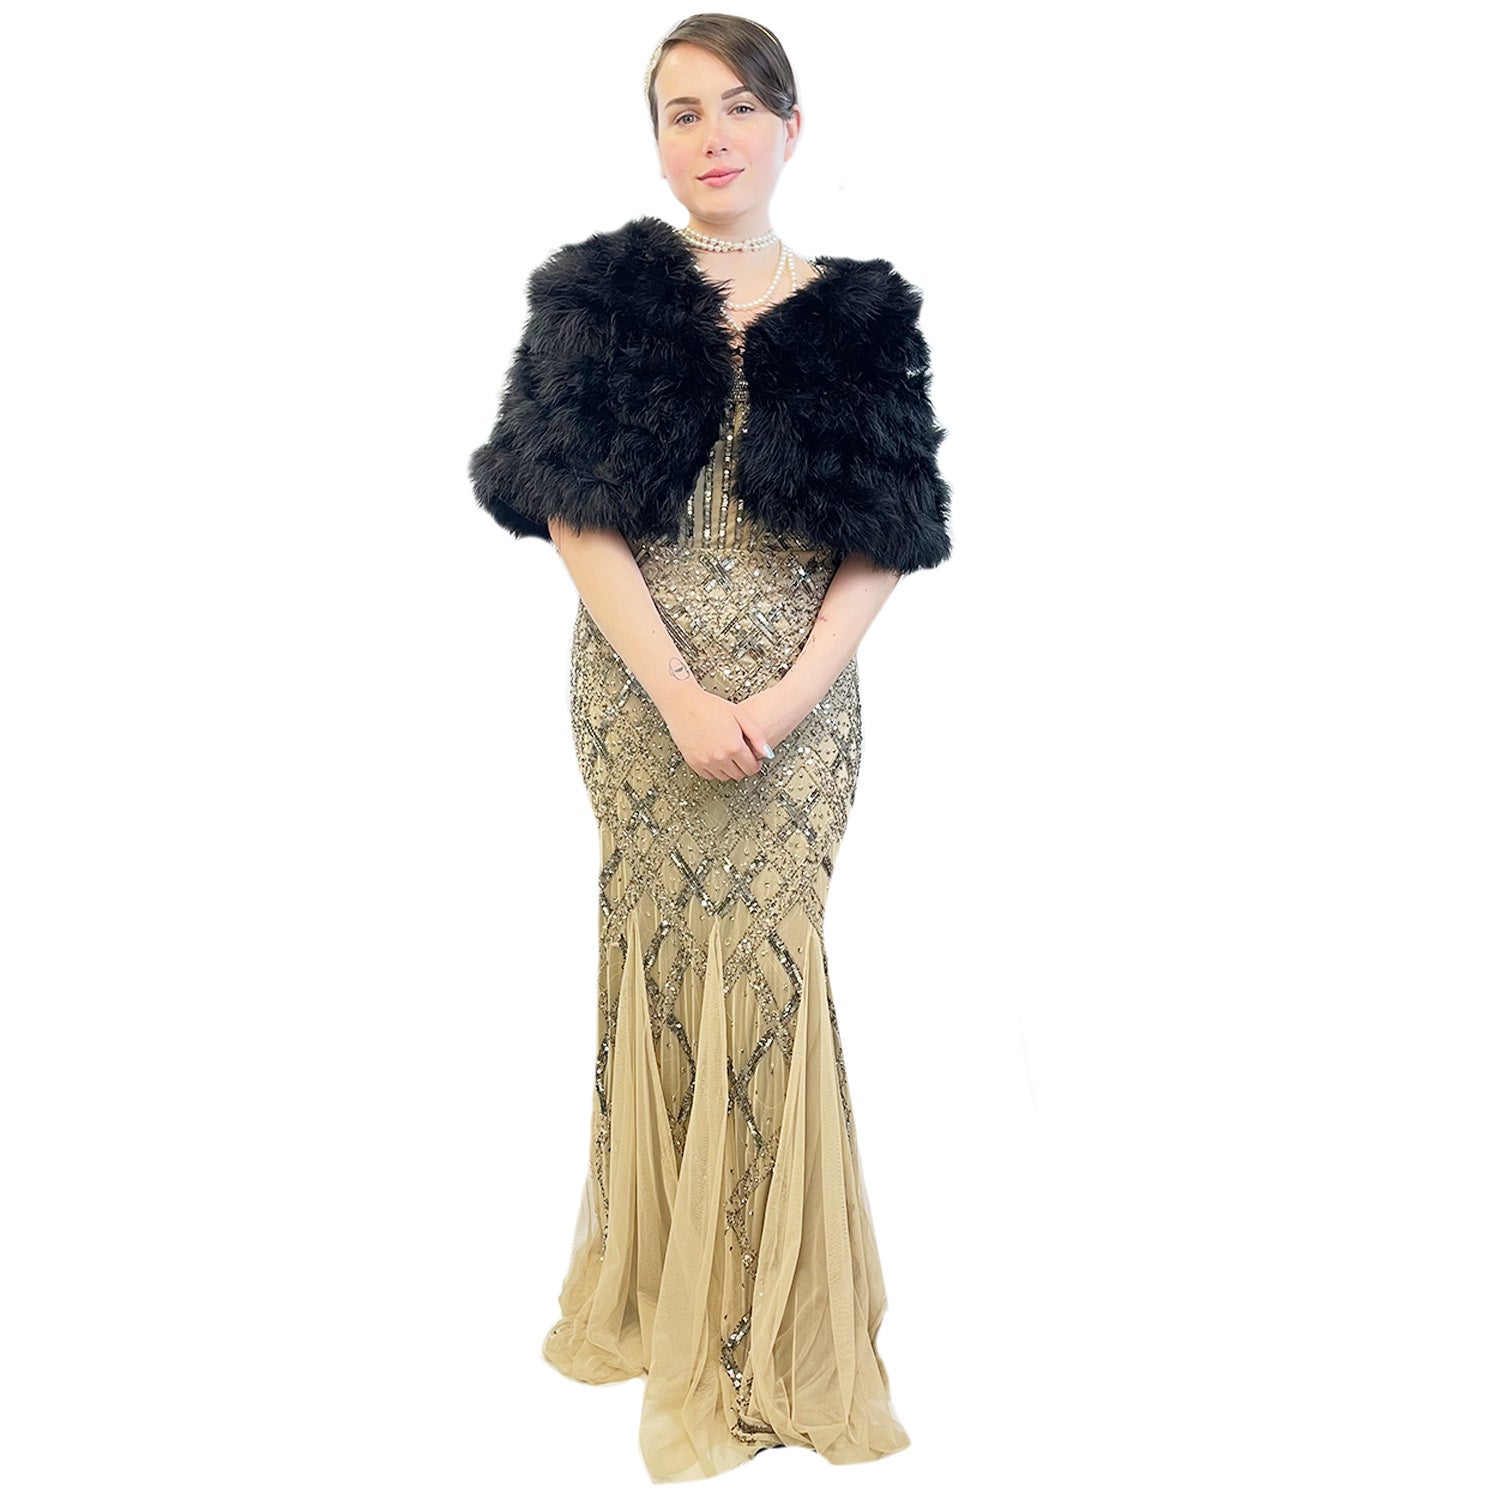 1920s Beige Beaded Evening Gown Women's Adult Costume w/ Pearls and Headpiece